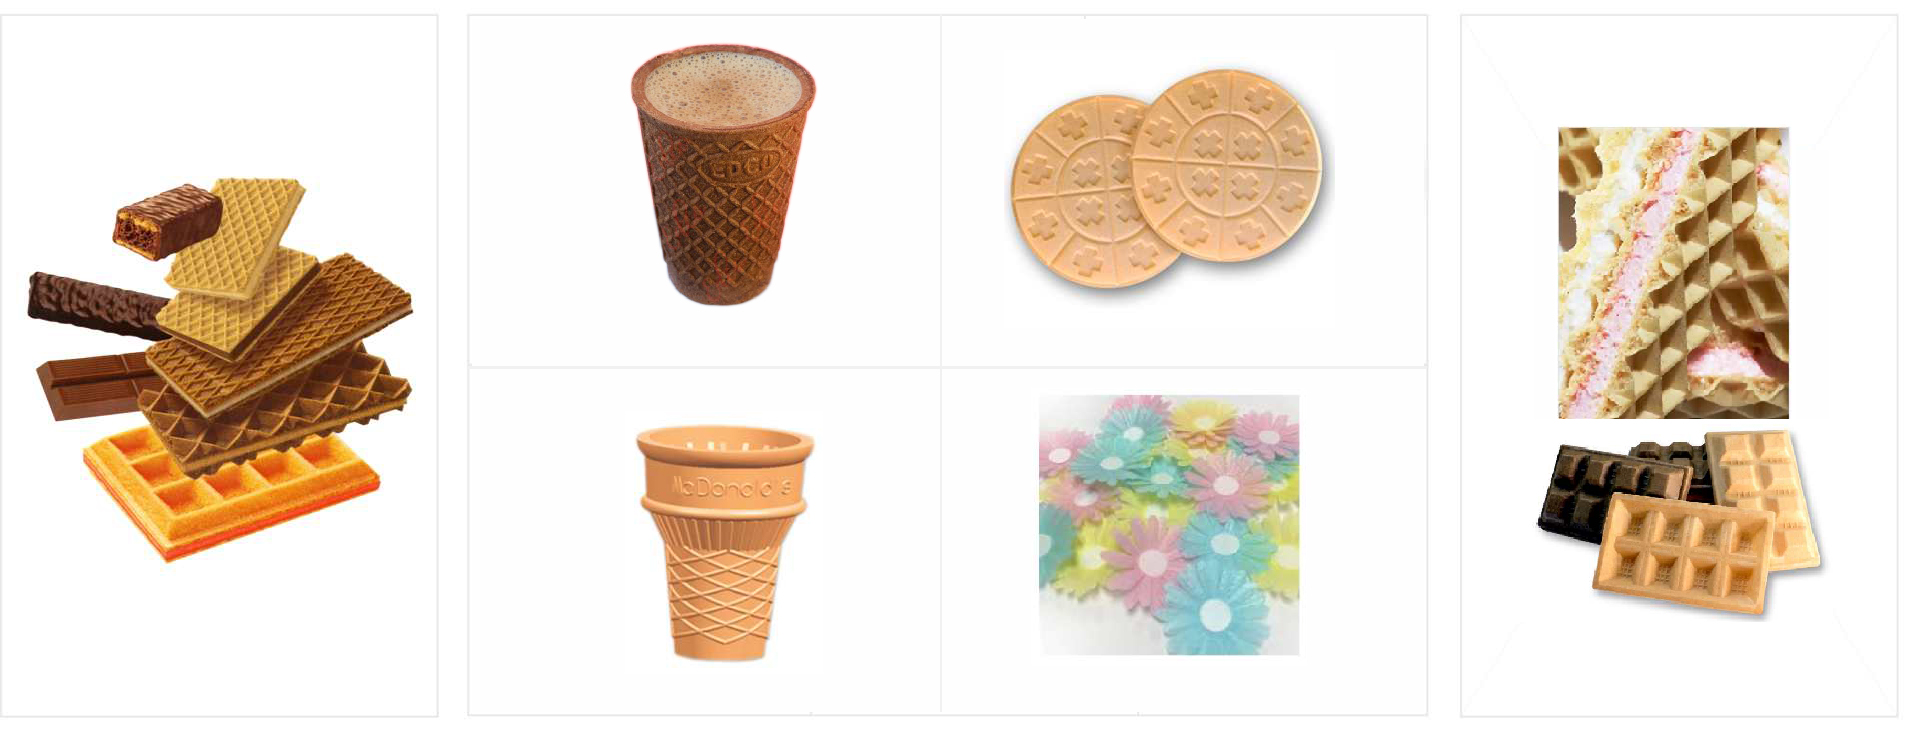 edible cups, monaka,wafer biscuit